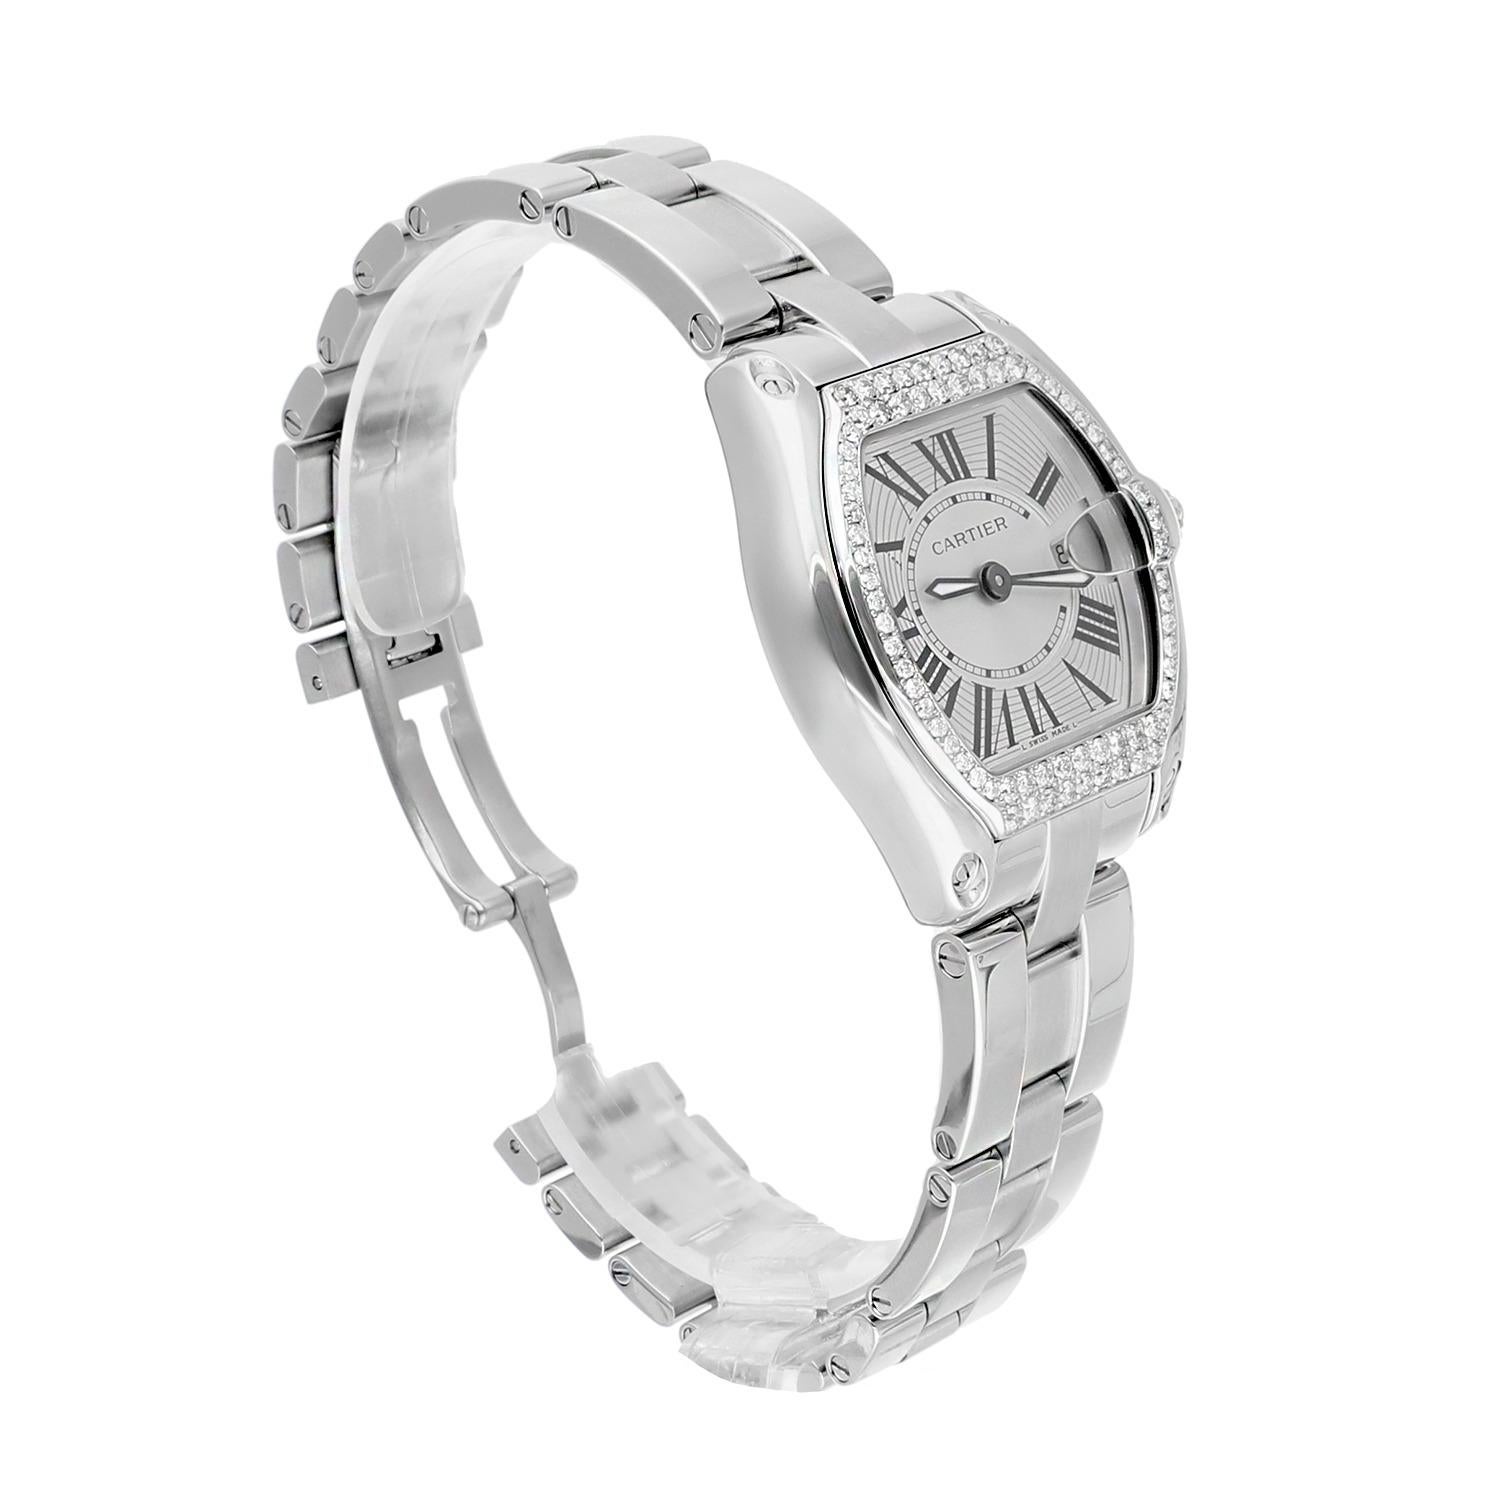 Cartier Roadster Ladies Silver Dial Stainless Steel Watch Diamond Bezel W62016V3 In Excellent Condition For Sale In New York, NY